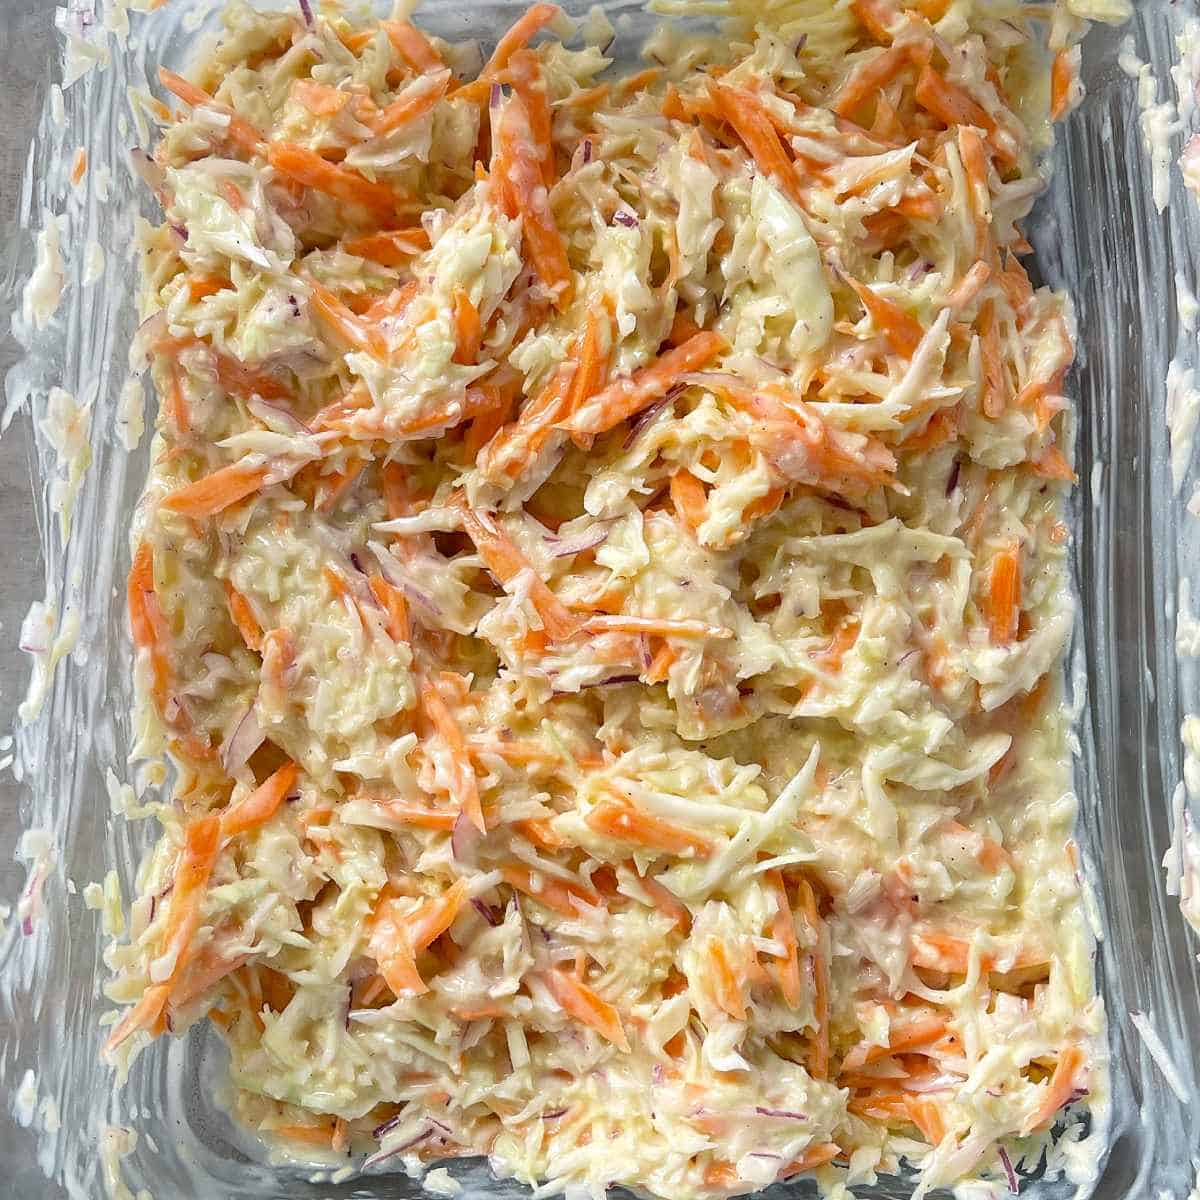 The mixed Coleslaw in a glass dish on a grey bench top.